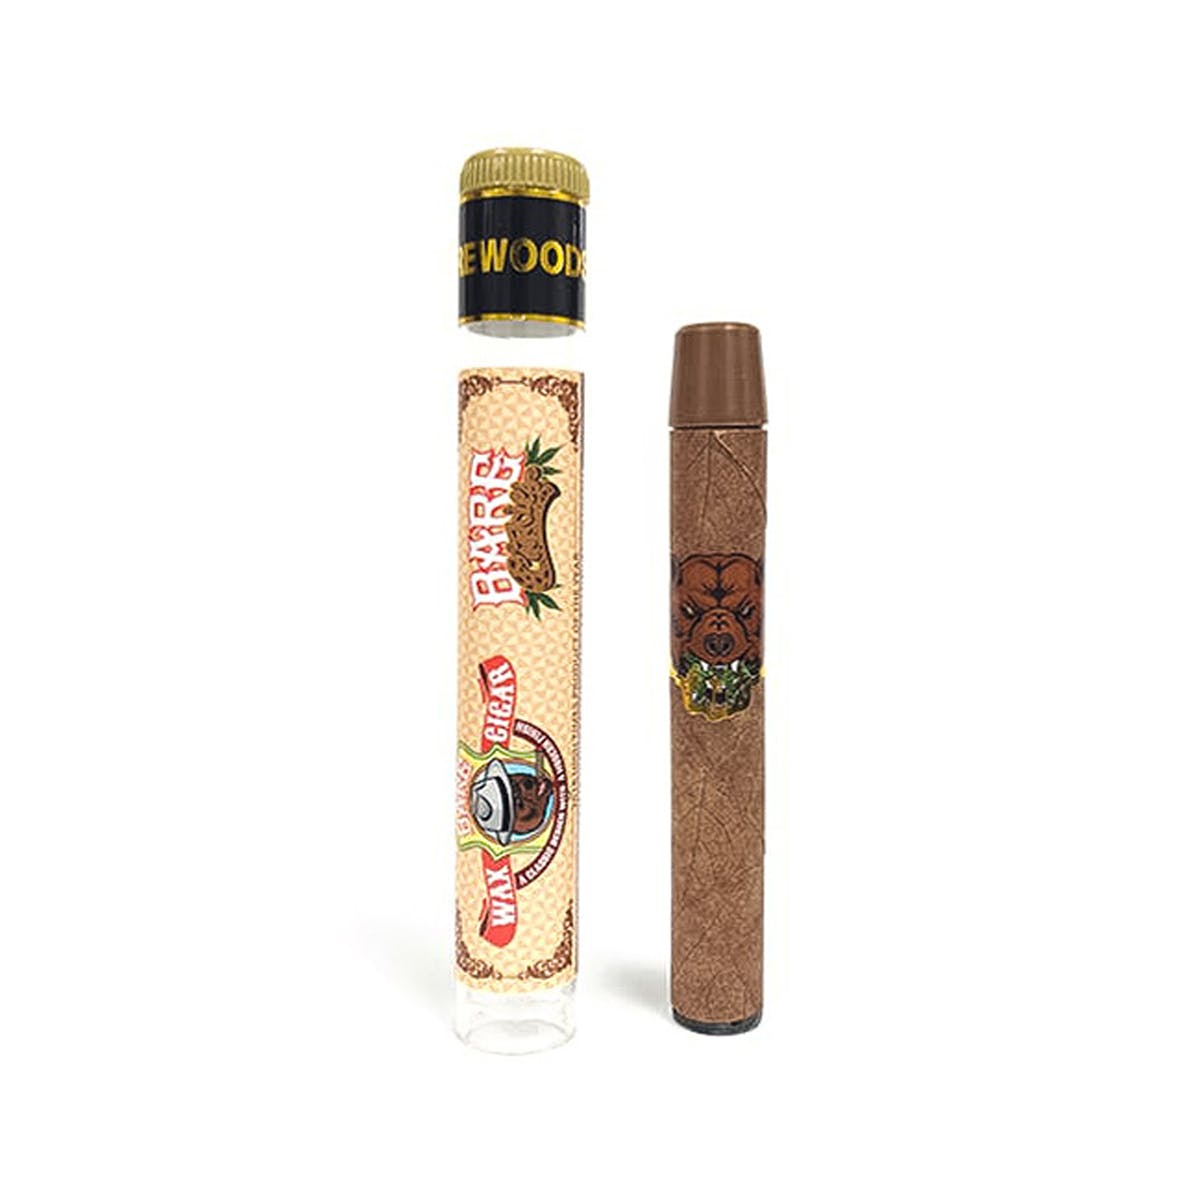 Wax Cigars by Barewoods - Cookies